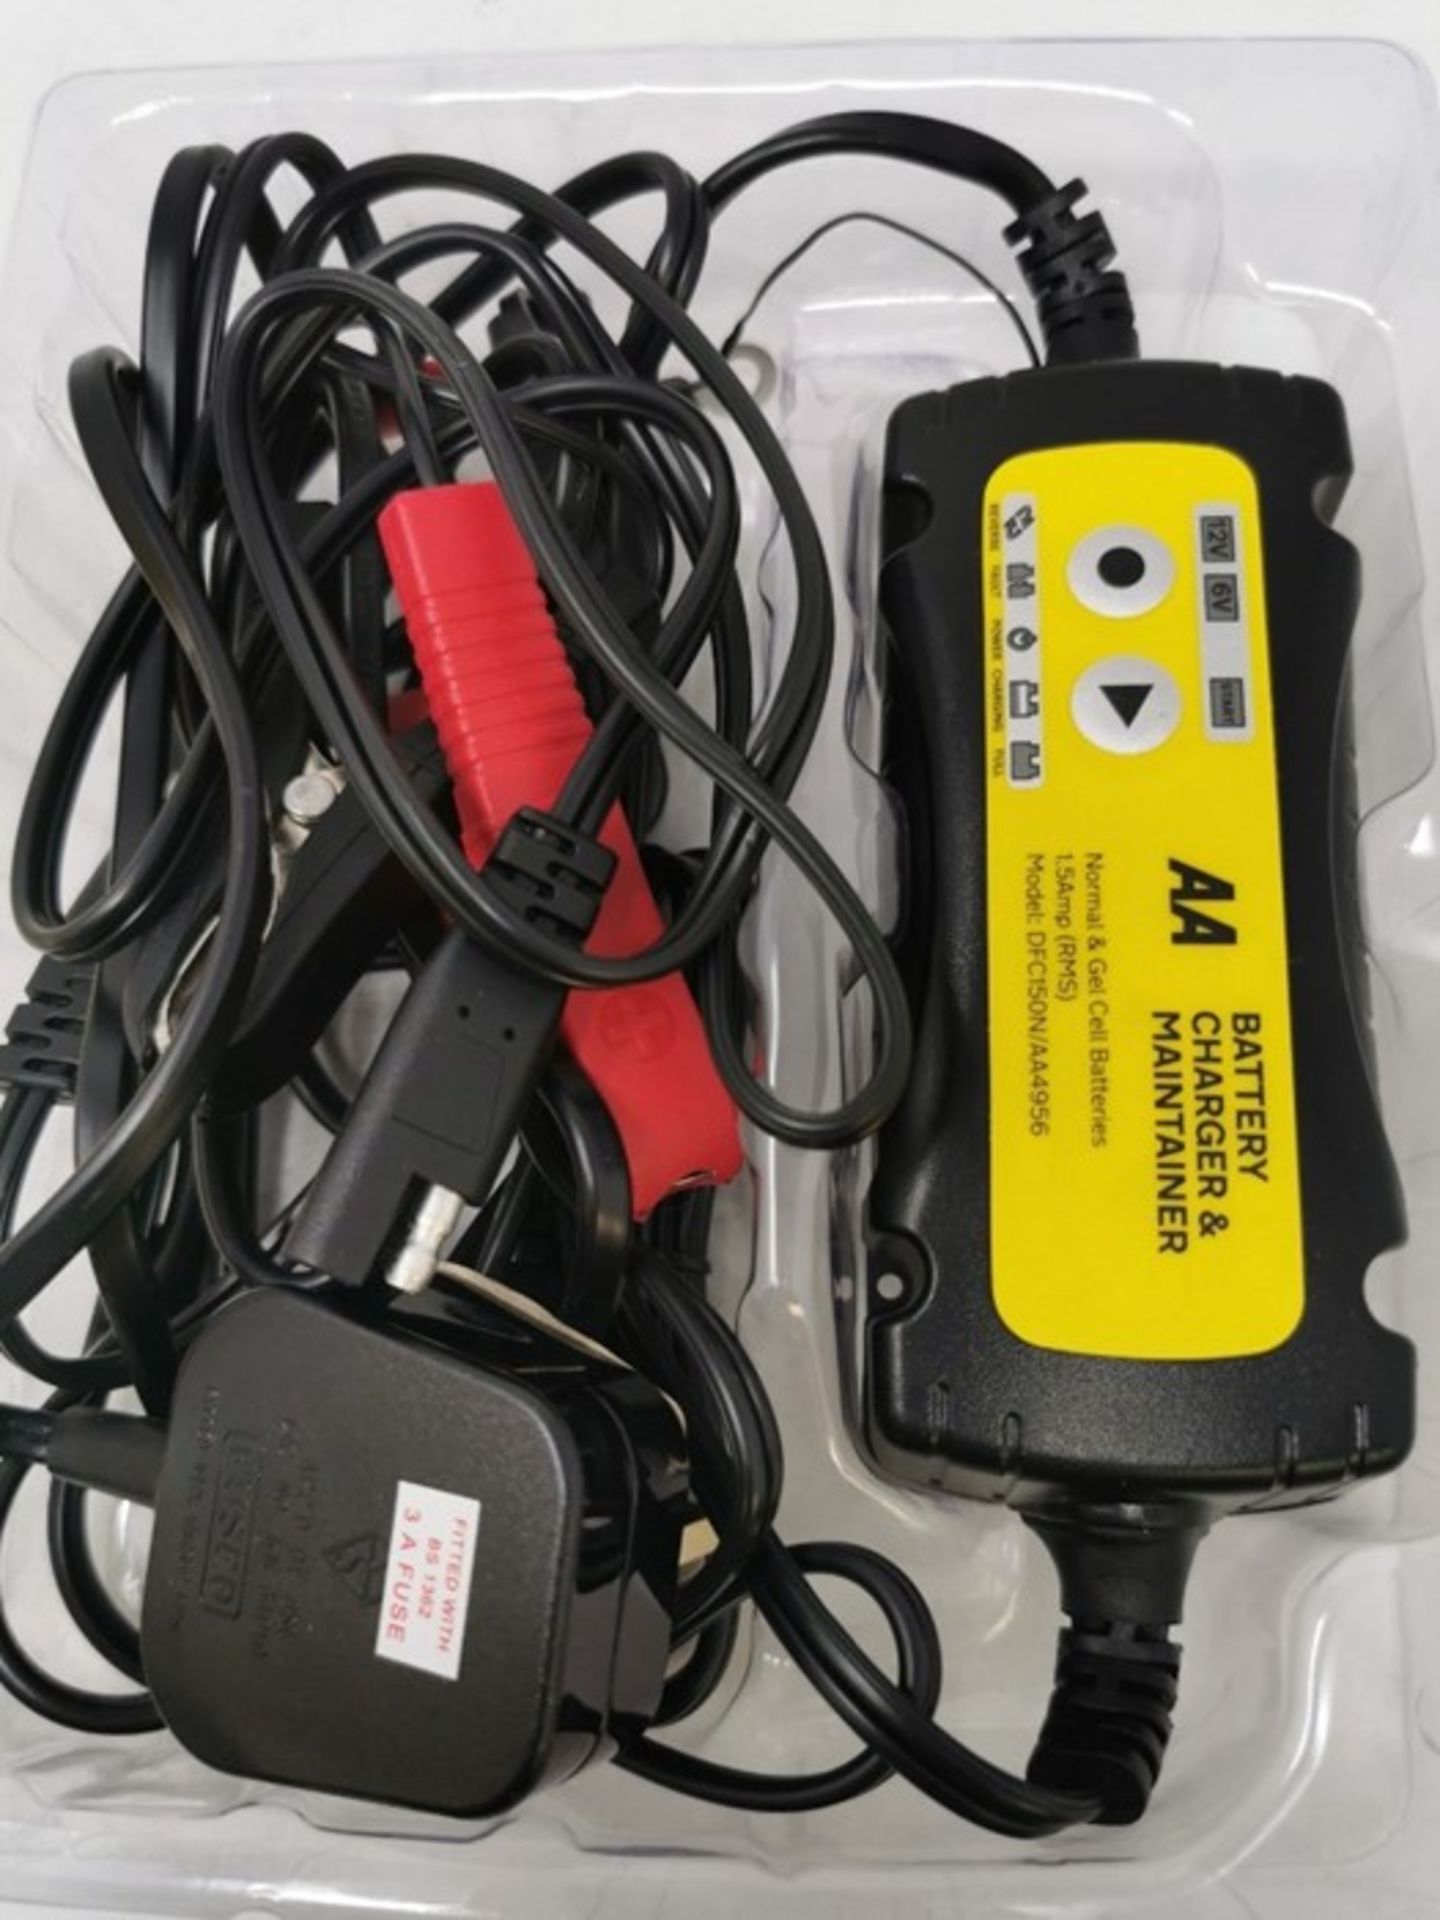 AA 1.5 Amp 6 V/12 V Car Battery Charger Maintain - Image 3 of 3